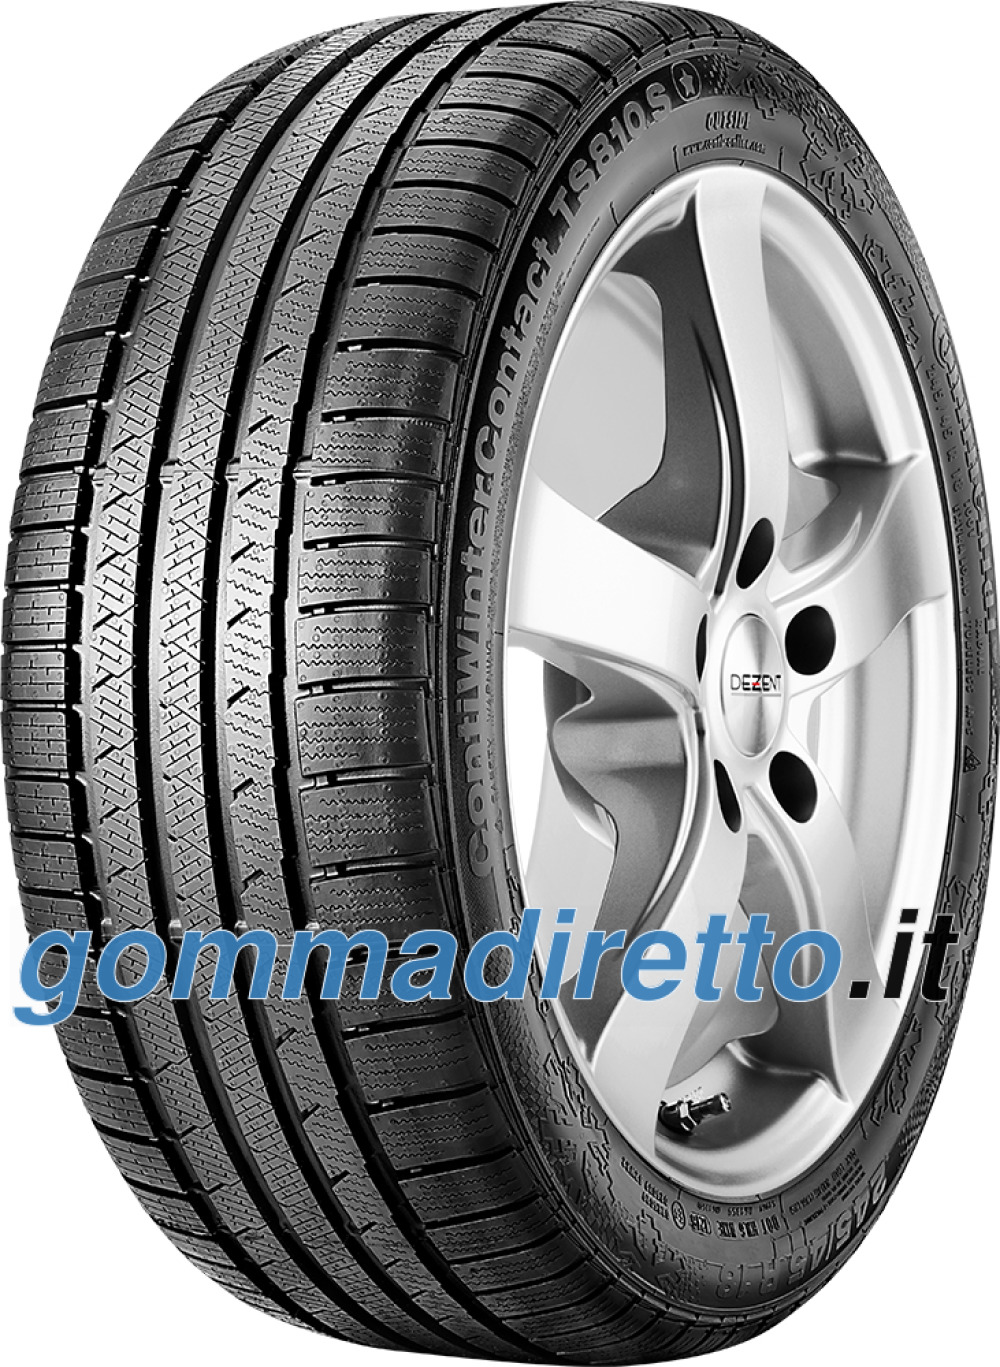 Image of Continental ContiWinterContact TS 810 S ( 175/65 R15 84T * )